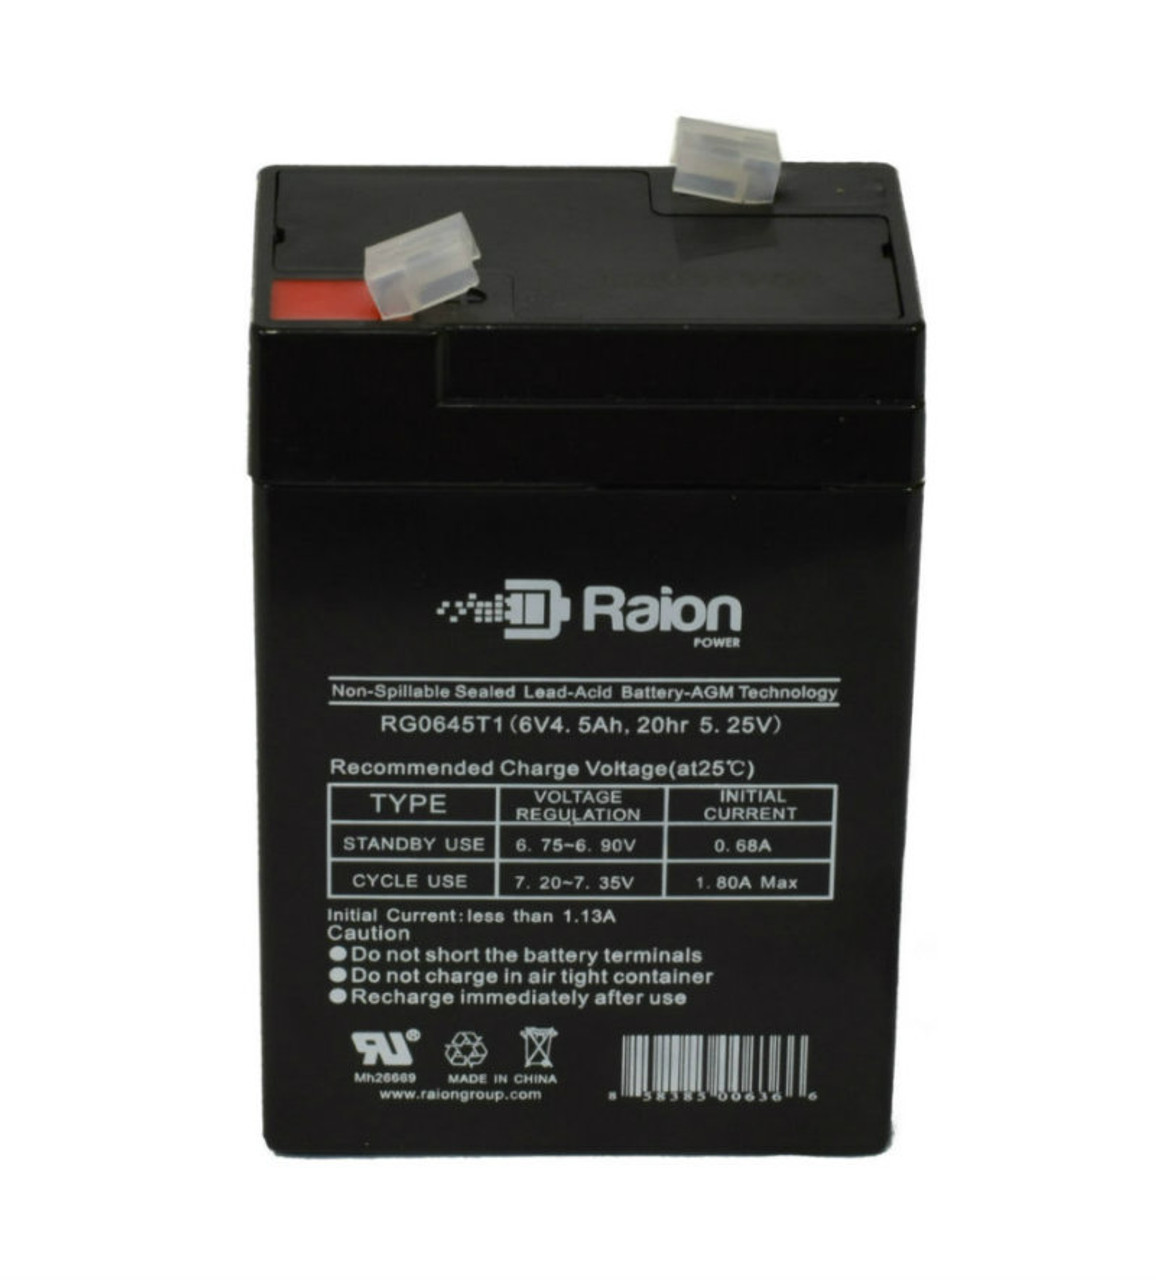 Raion Power RG0645T1 Replacement Battery Cartridge for Neuton Power NP645